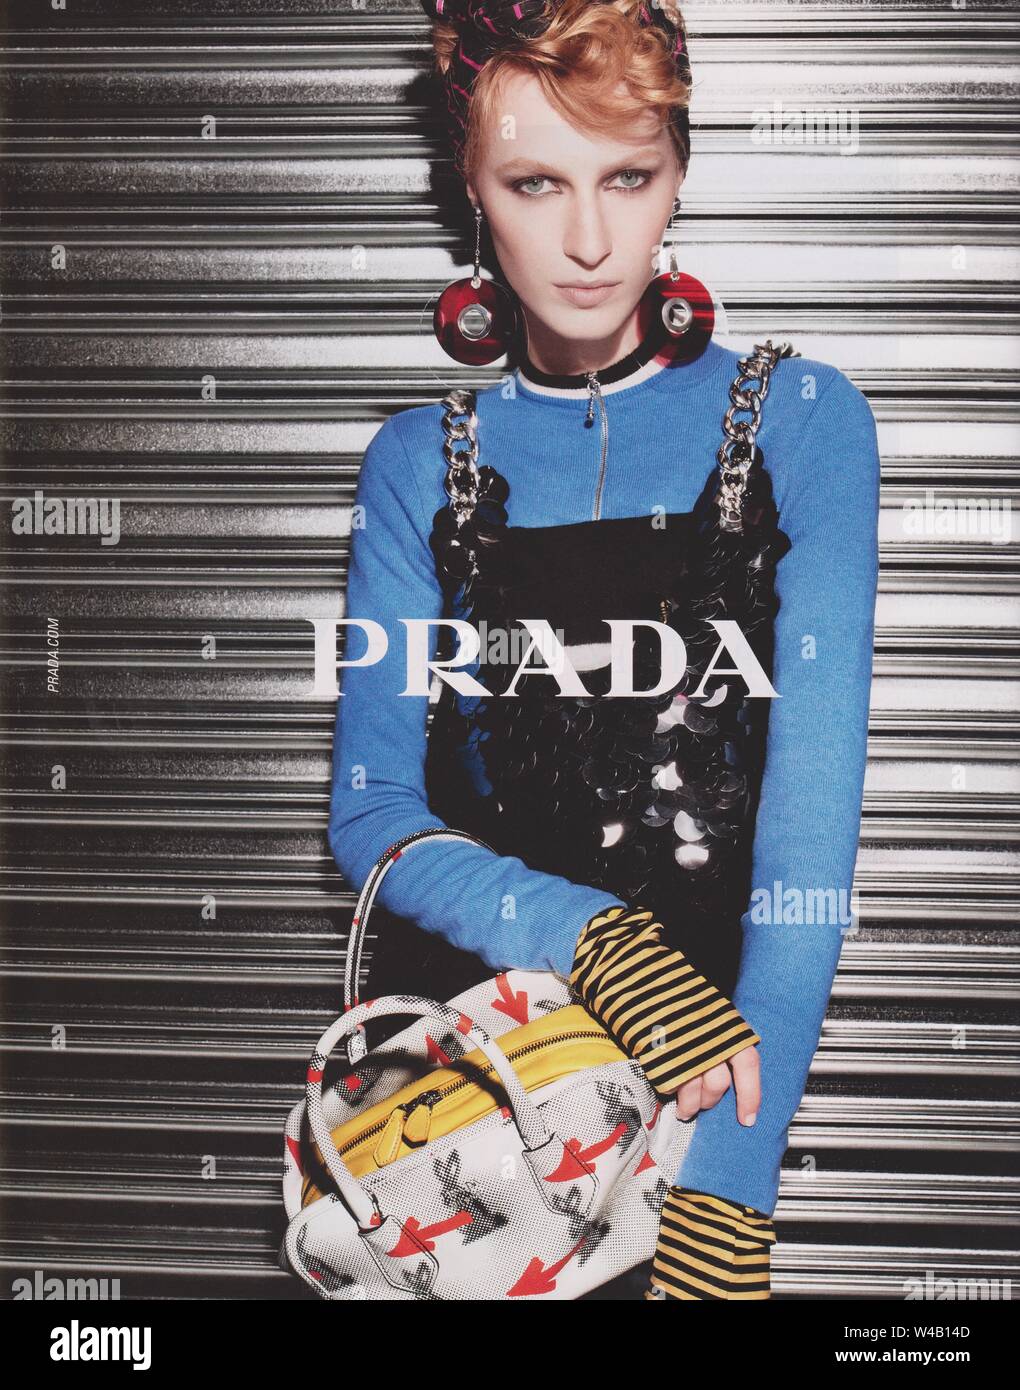 poster advertising PRADA fashion house in paper magazine from 2015 year,  advertisement, creative PRADA advert from 2010s Stock Photo - Alamy